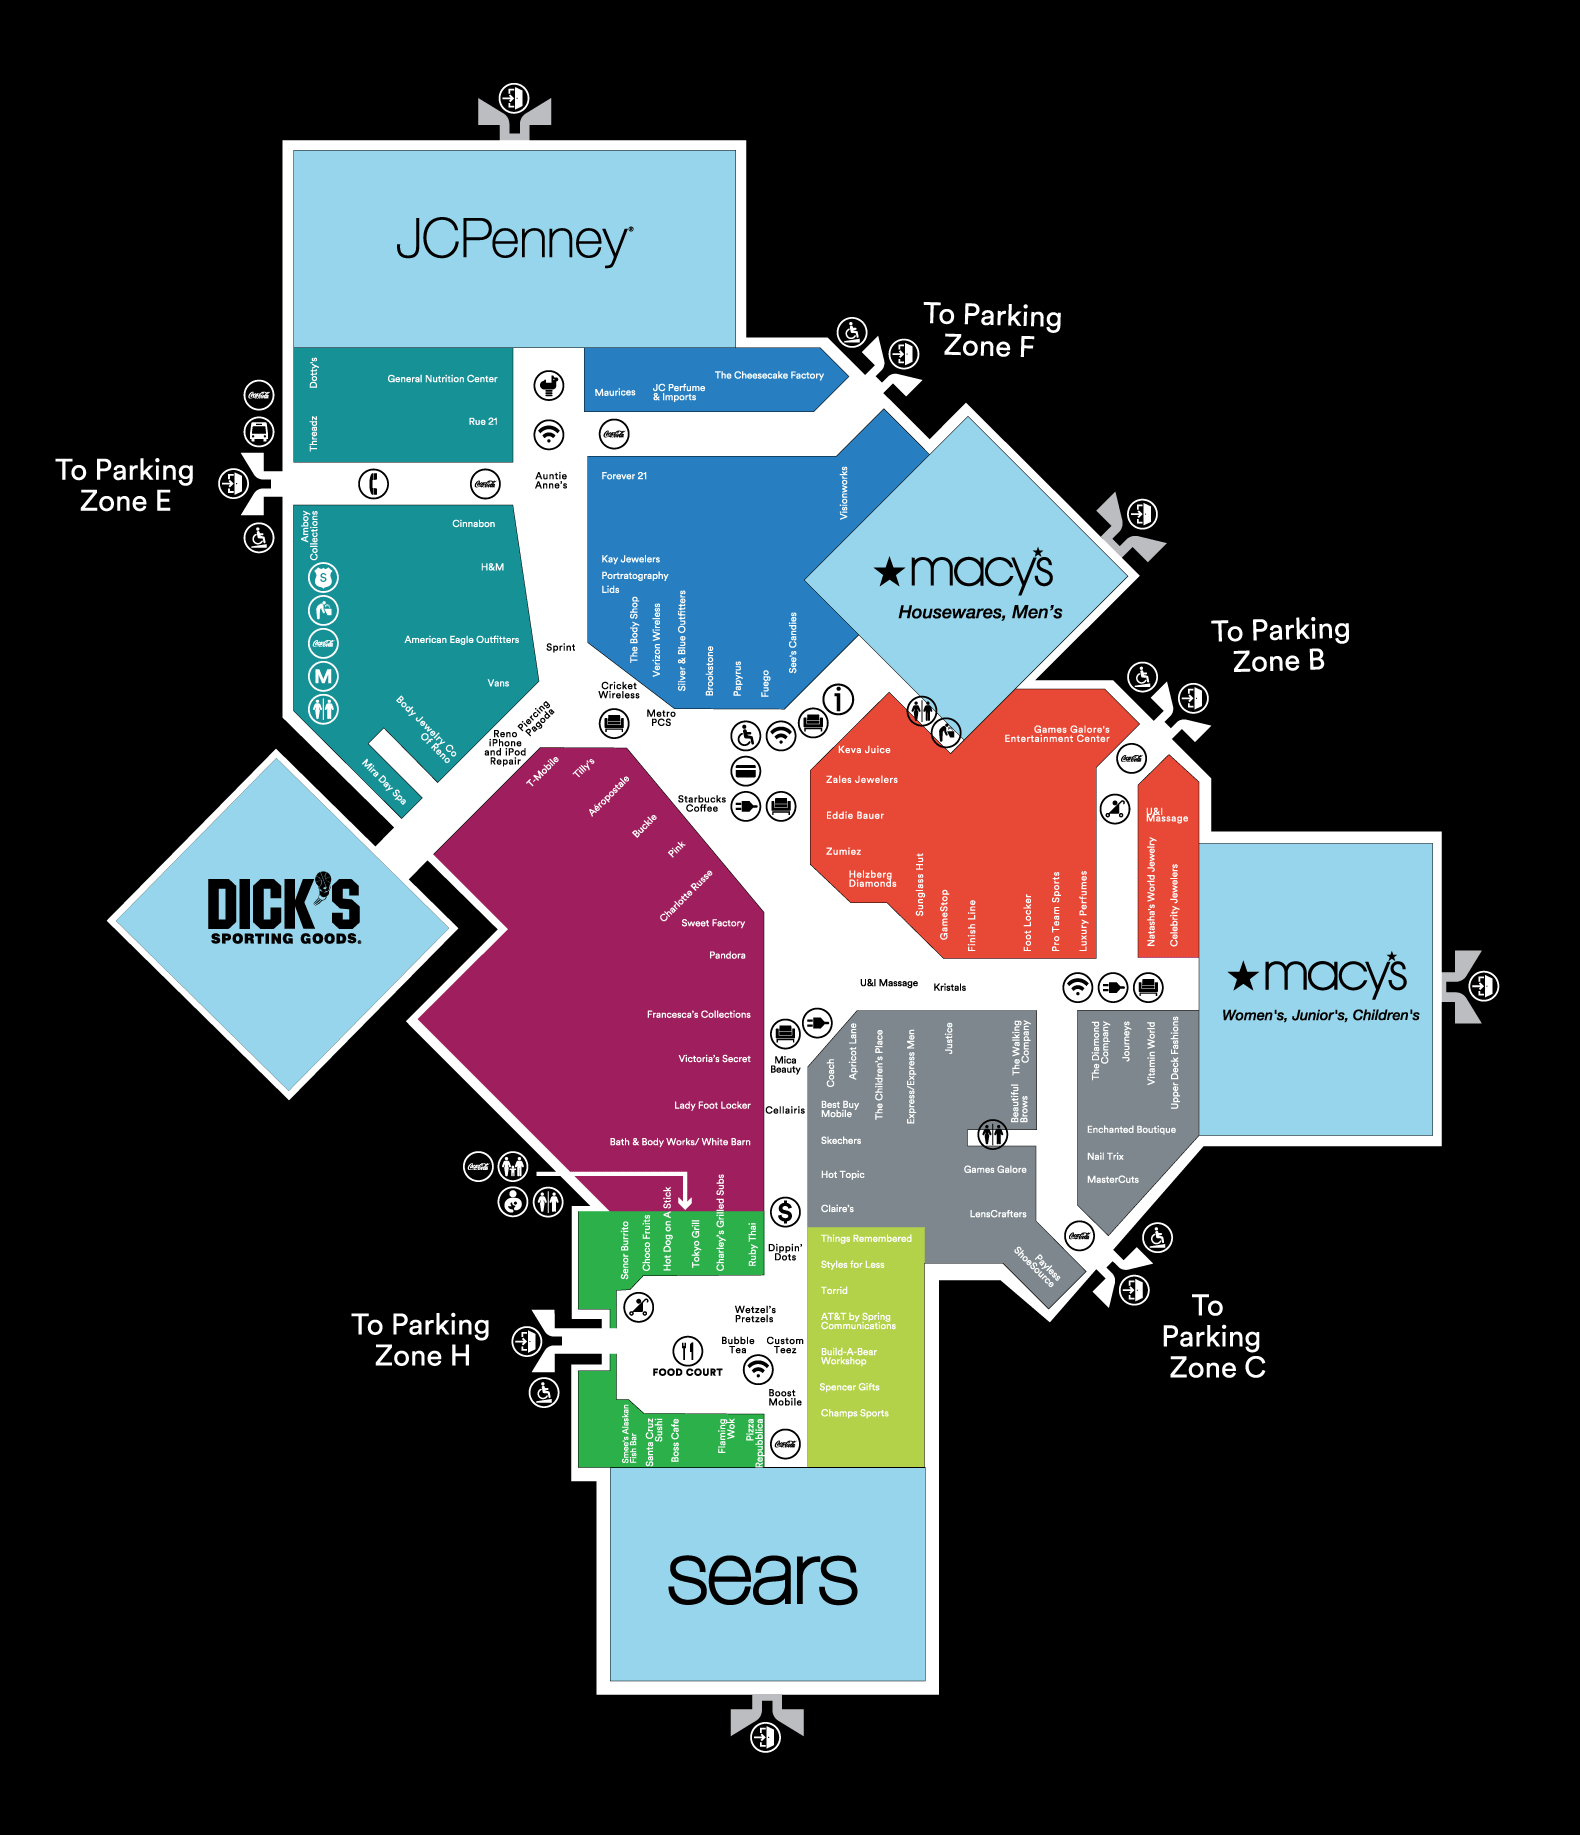 Park Meadows Store Map Welcome To Meadowood Mall® - A Shopping Center In Reno, Nv - A Simon  Property